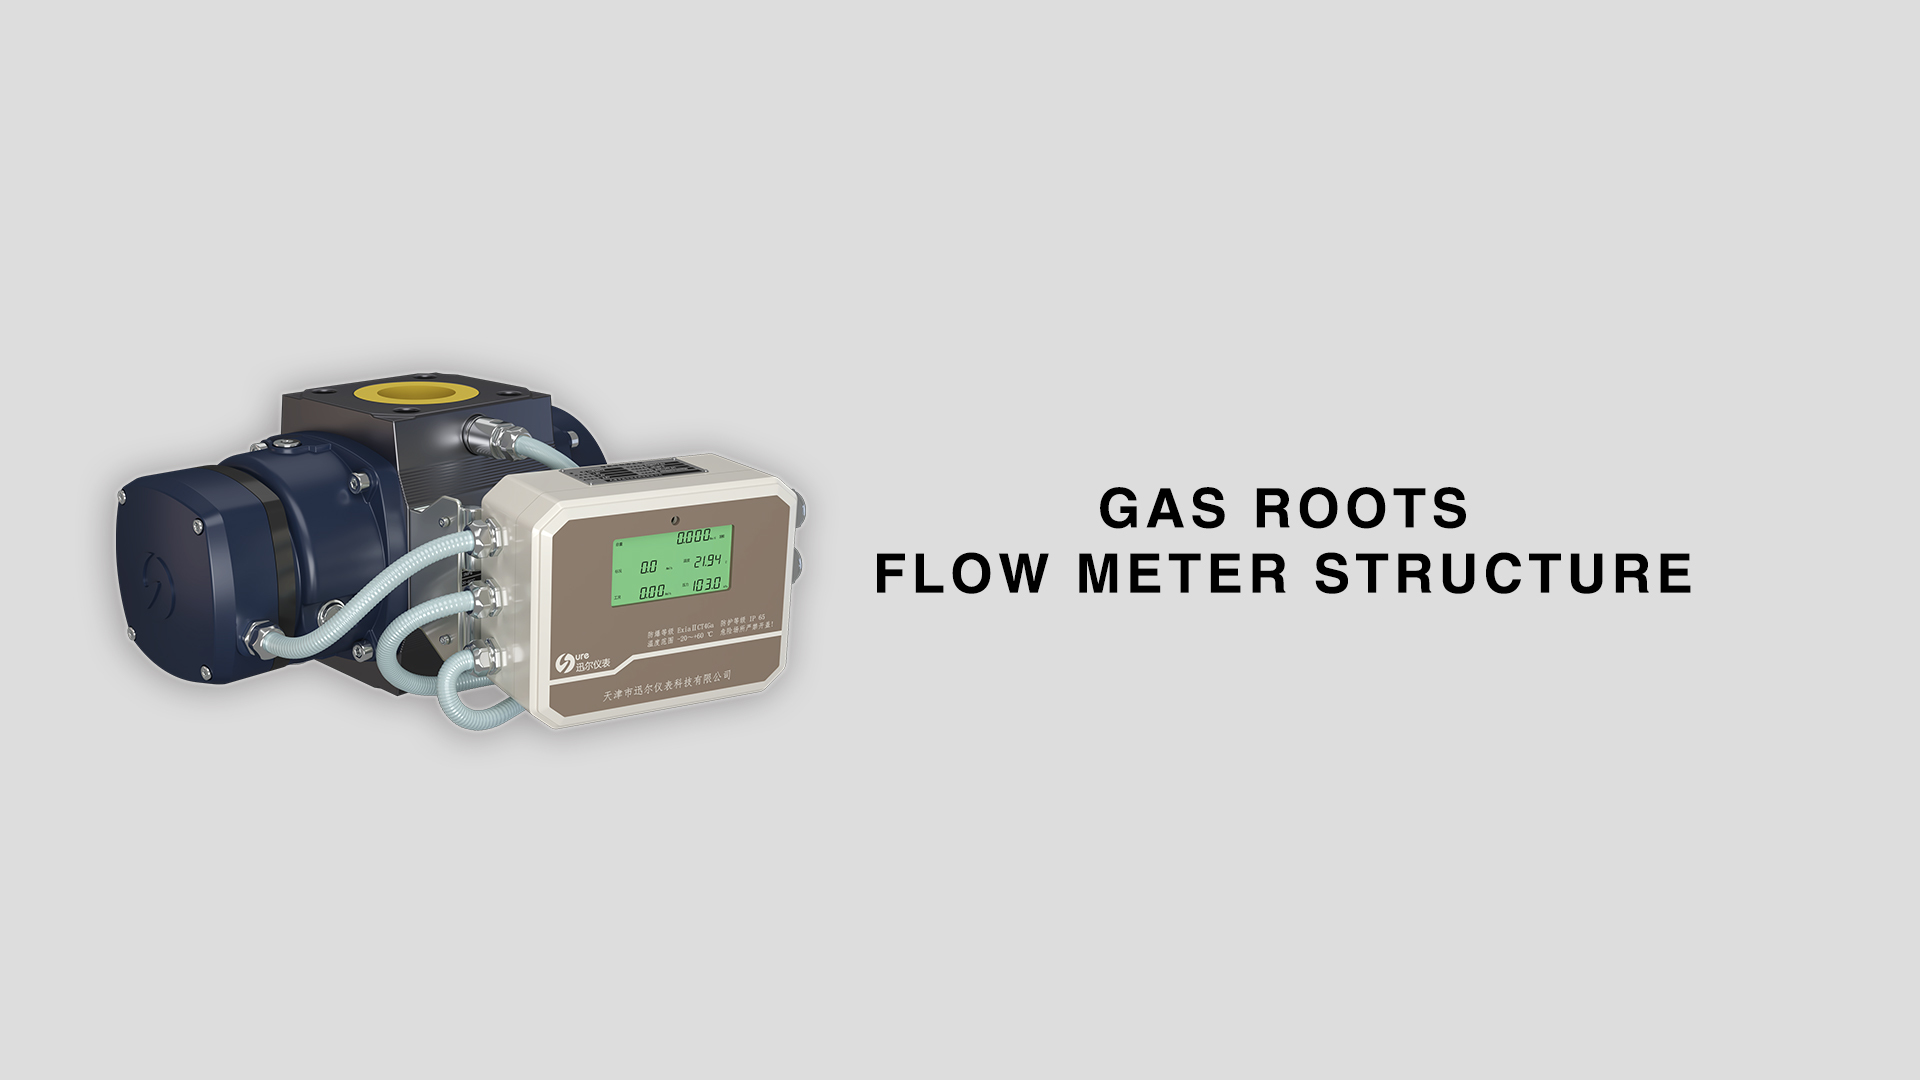 Gas roots flow meter structure